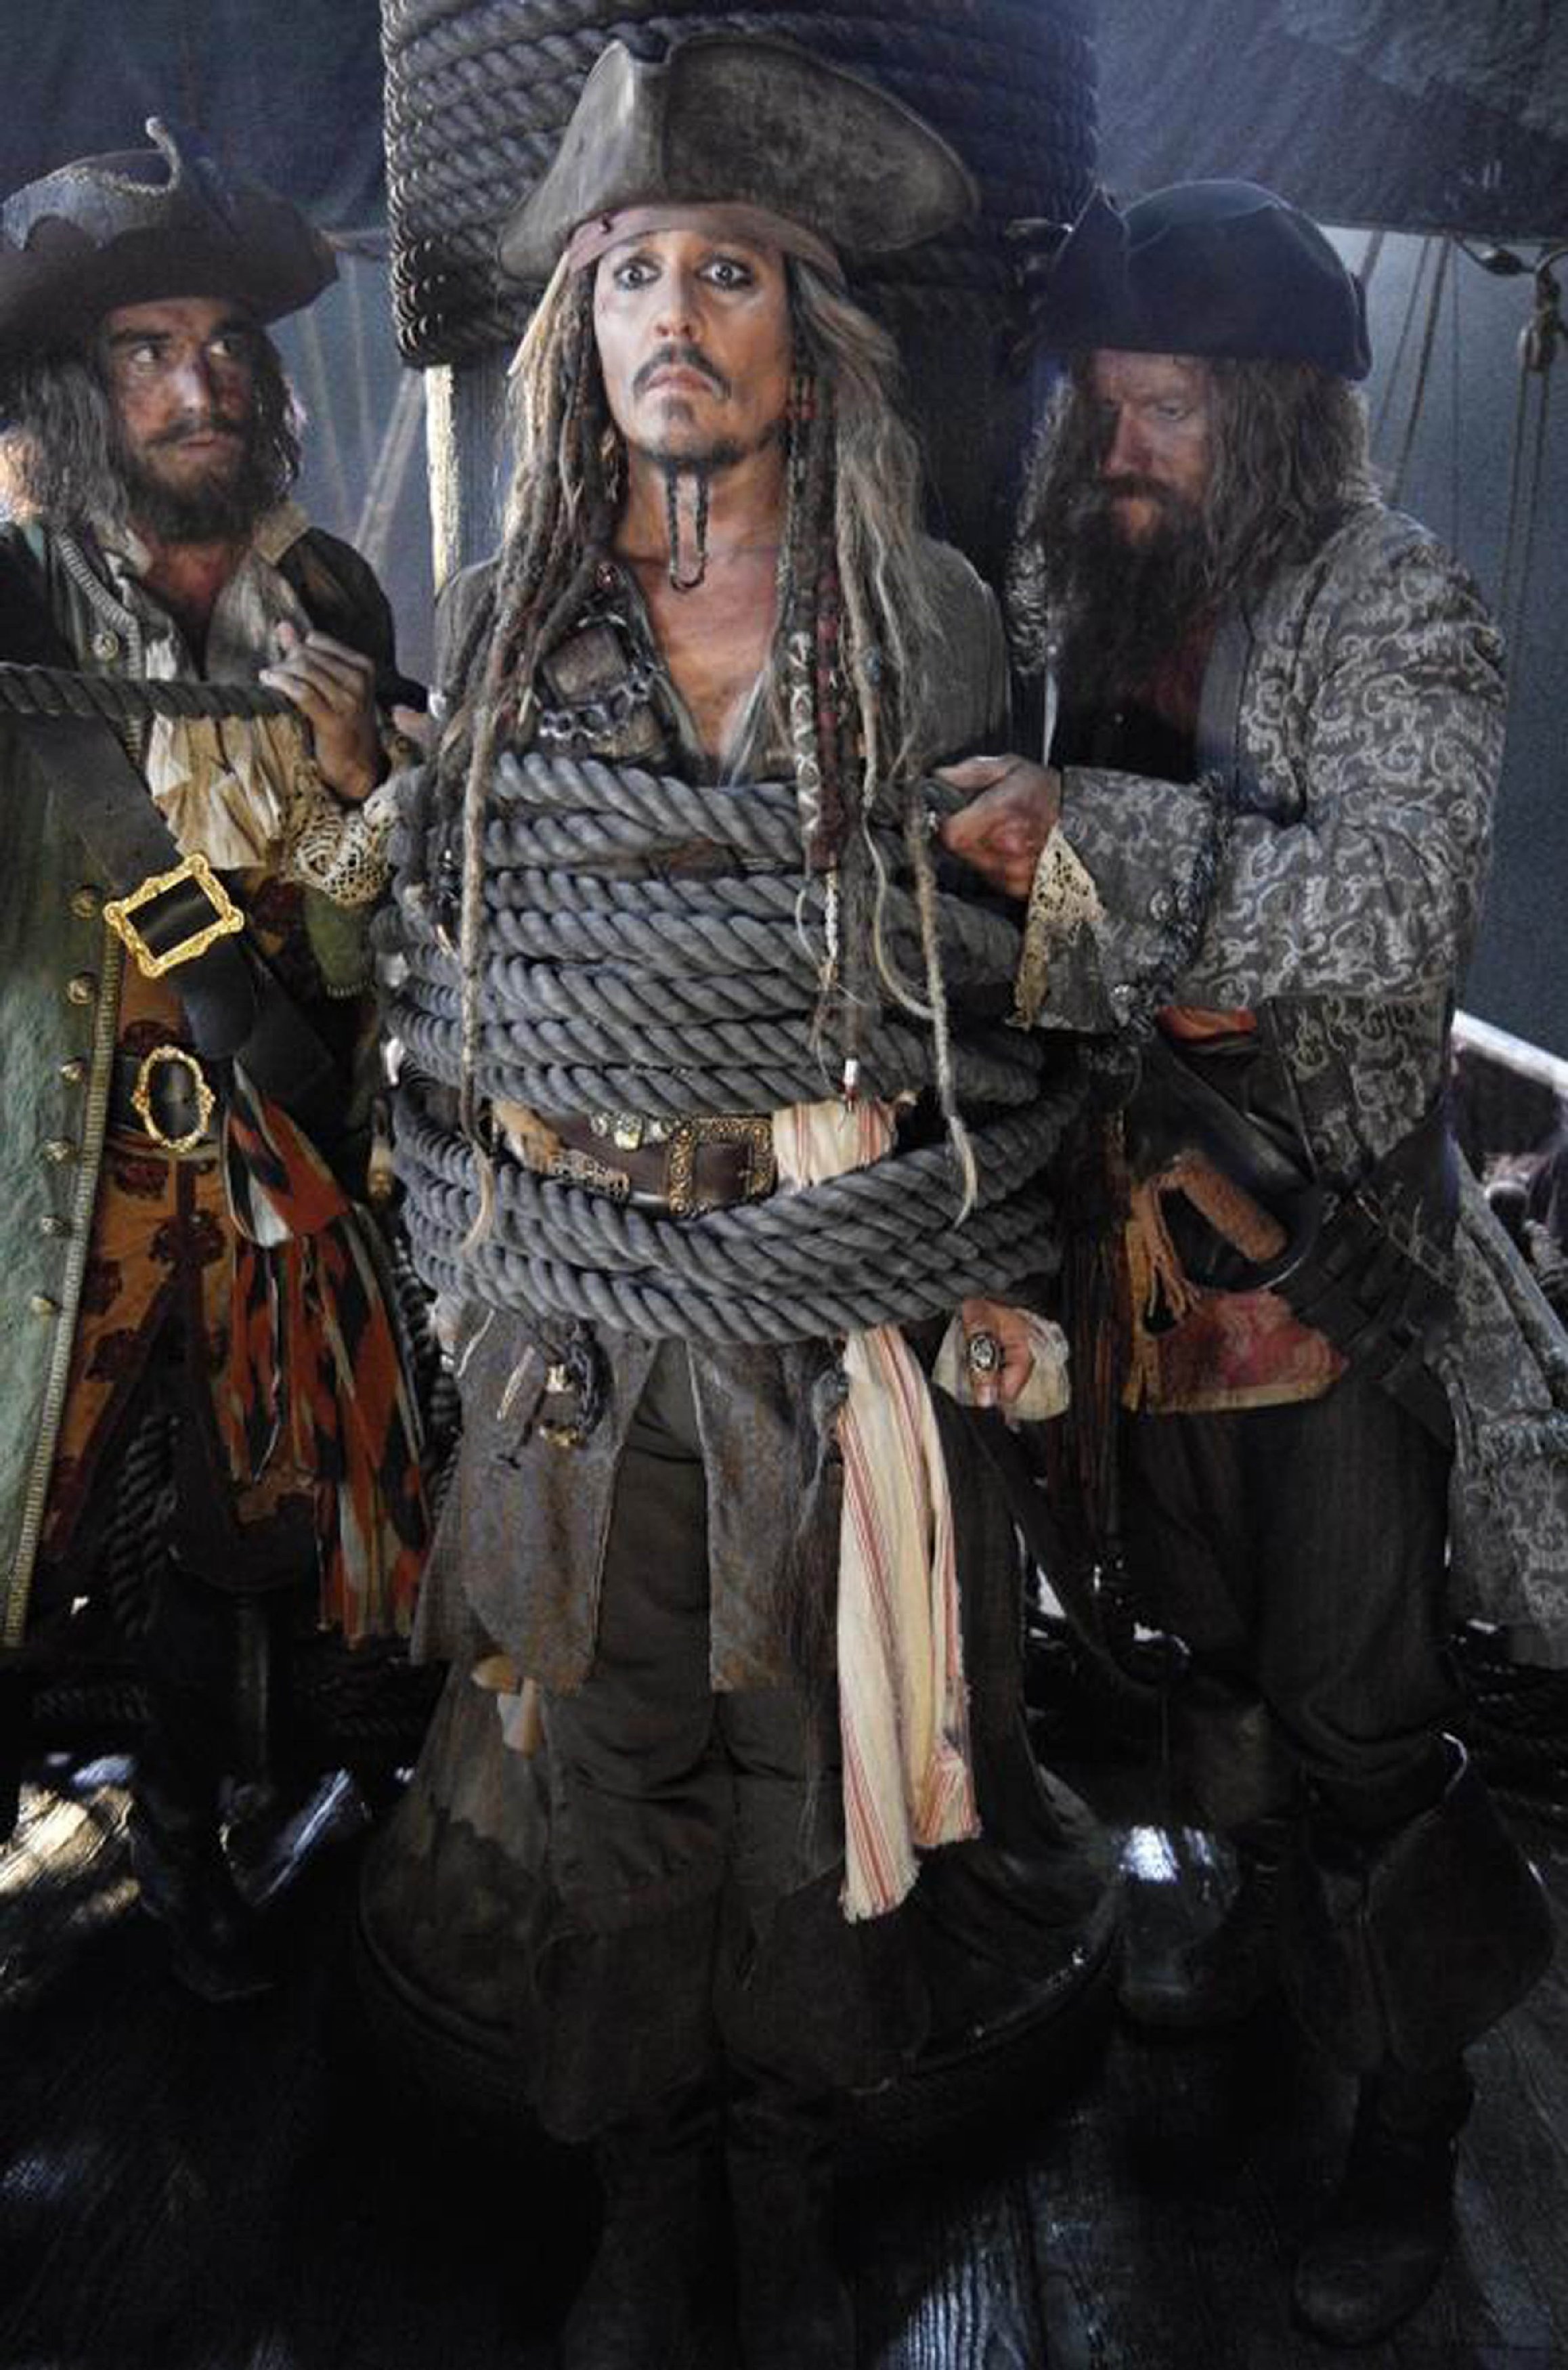 22-4-2015 "Pirates of the Caribbean: Dead Men Tell No Tales" film still Pictured: Johnny Depp PLANET PHOTOS www.planetphotos.co.uk info@planetphotos.co.uk +44 (0)20 8883 1438